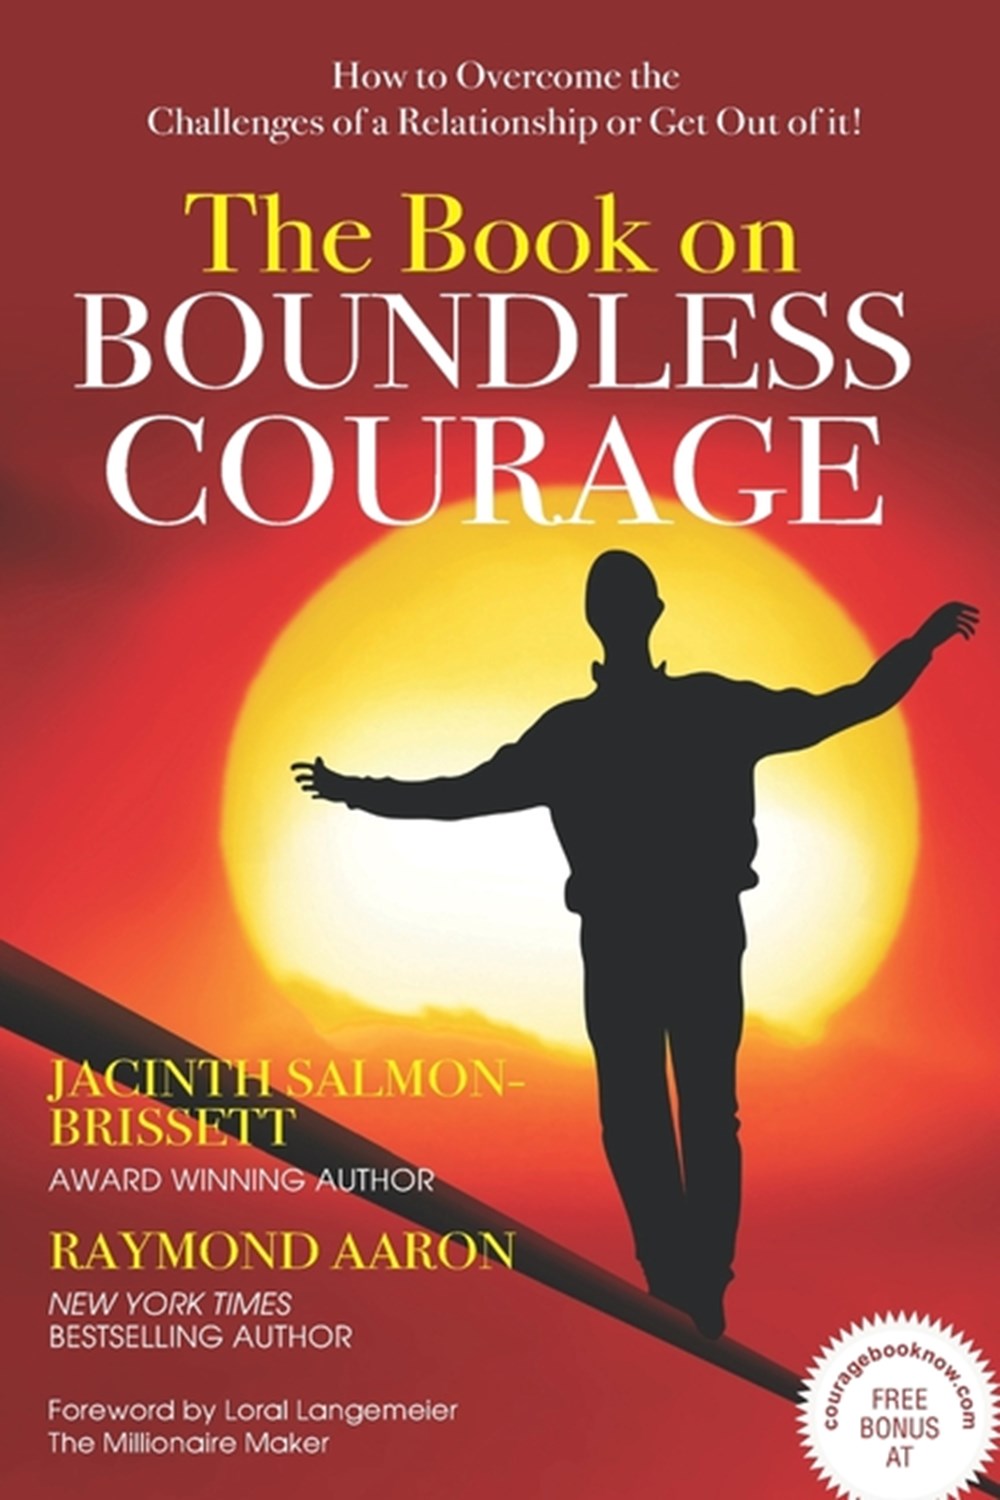 Book on Boundless Courage: How to Overcome the Challenges of a Relationship or Get Out of it!